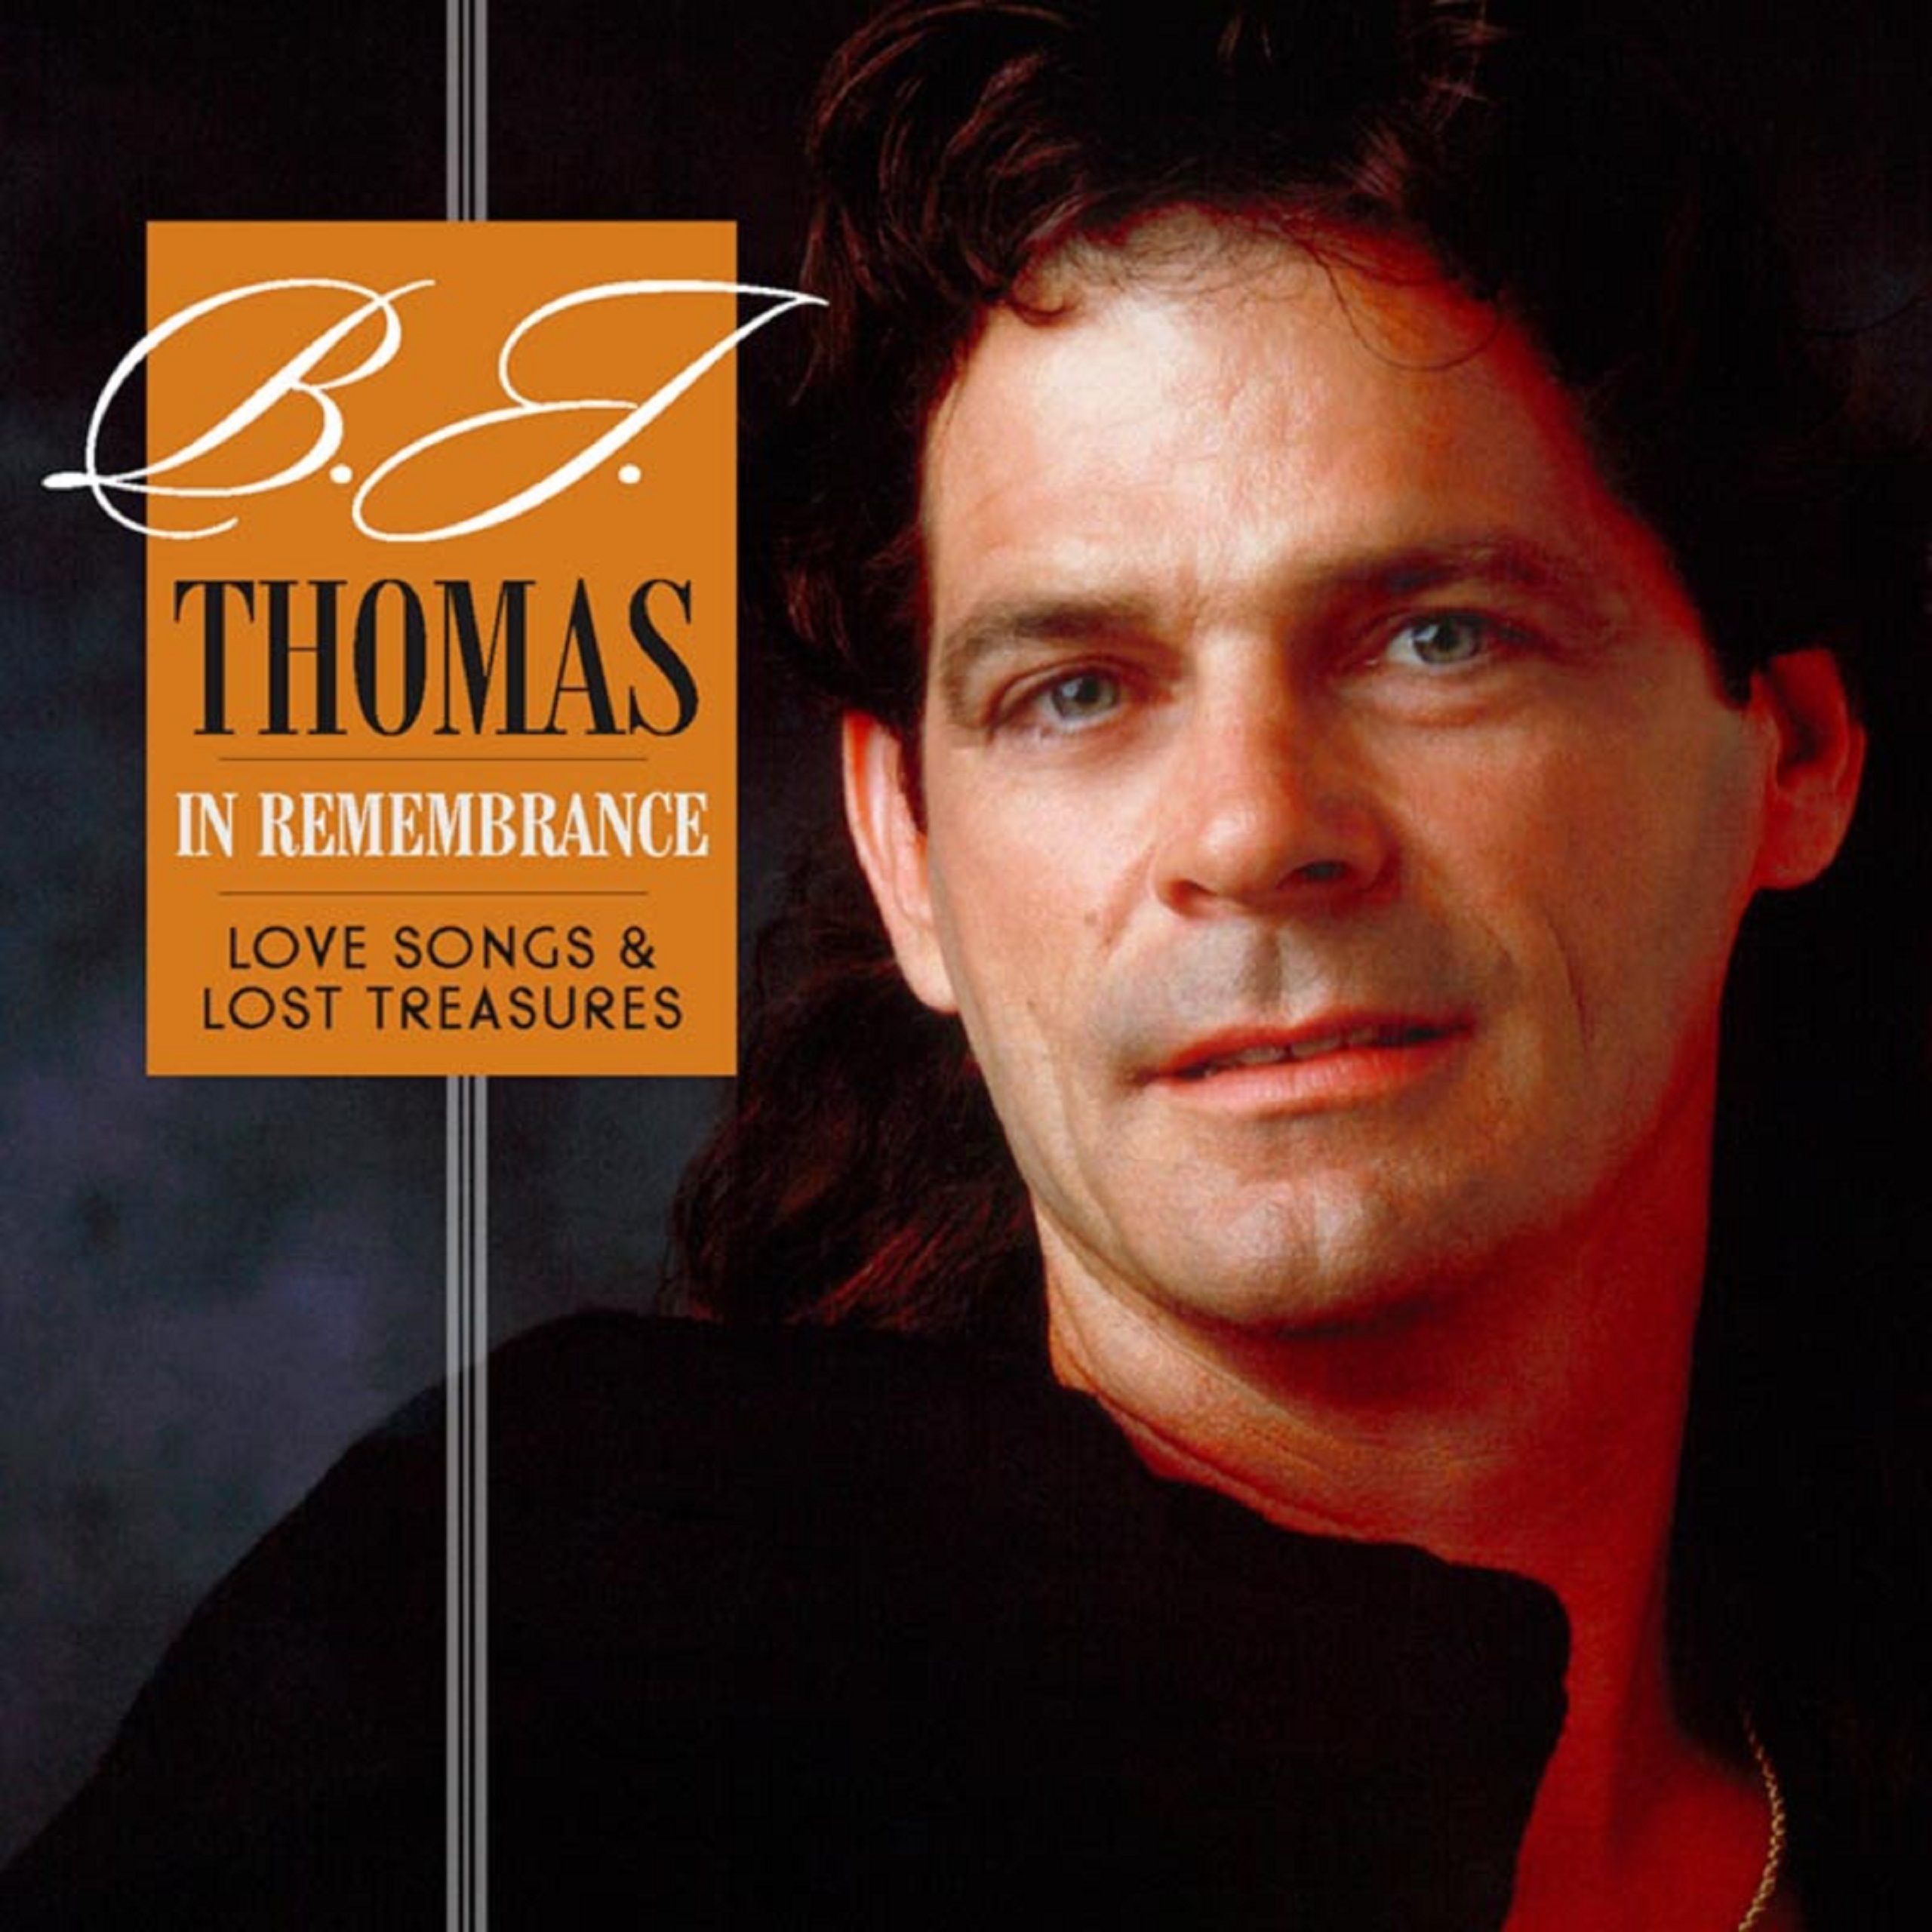 B.J. THOMAS 18-SONG CD TO BE RELEASED ON FEBRUARY 4